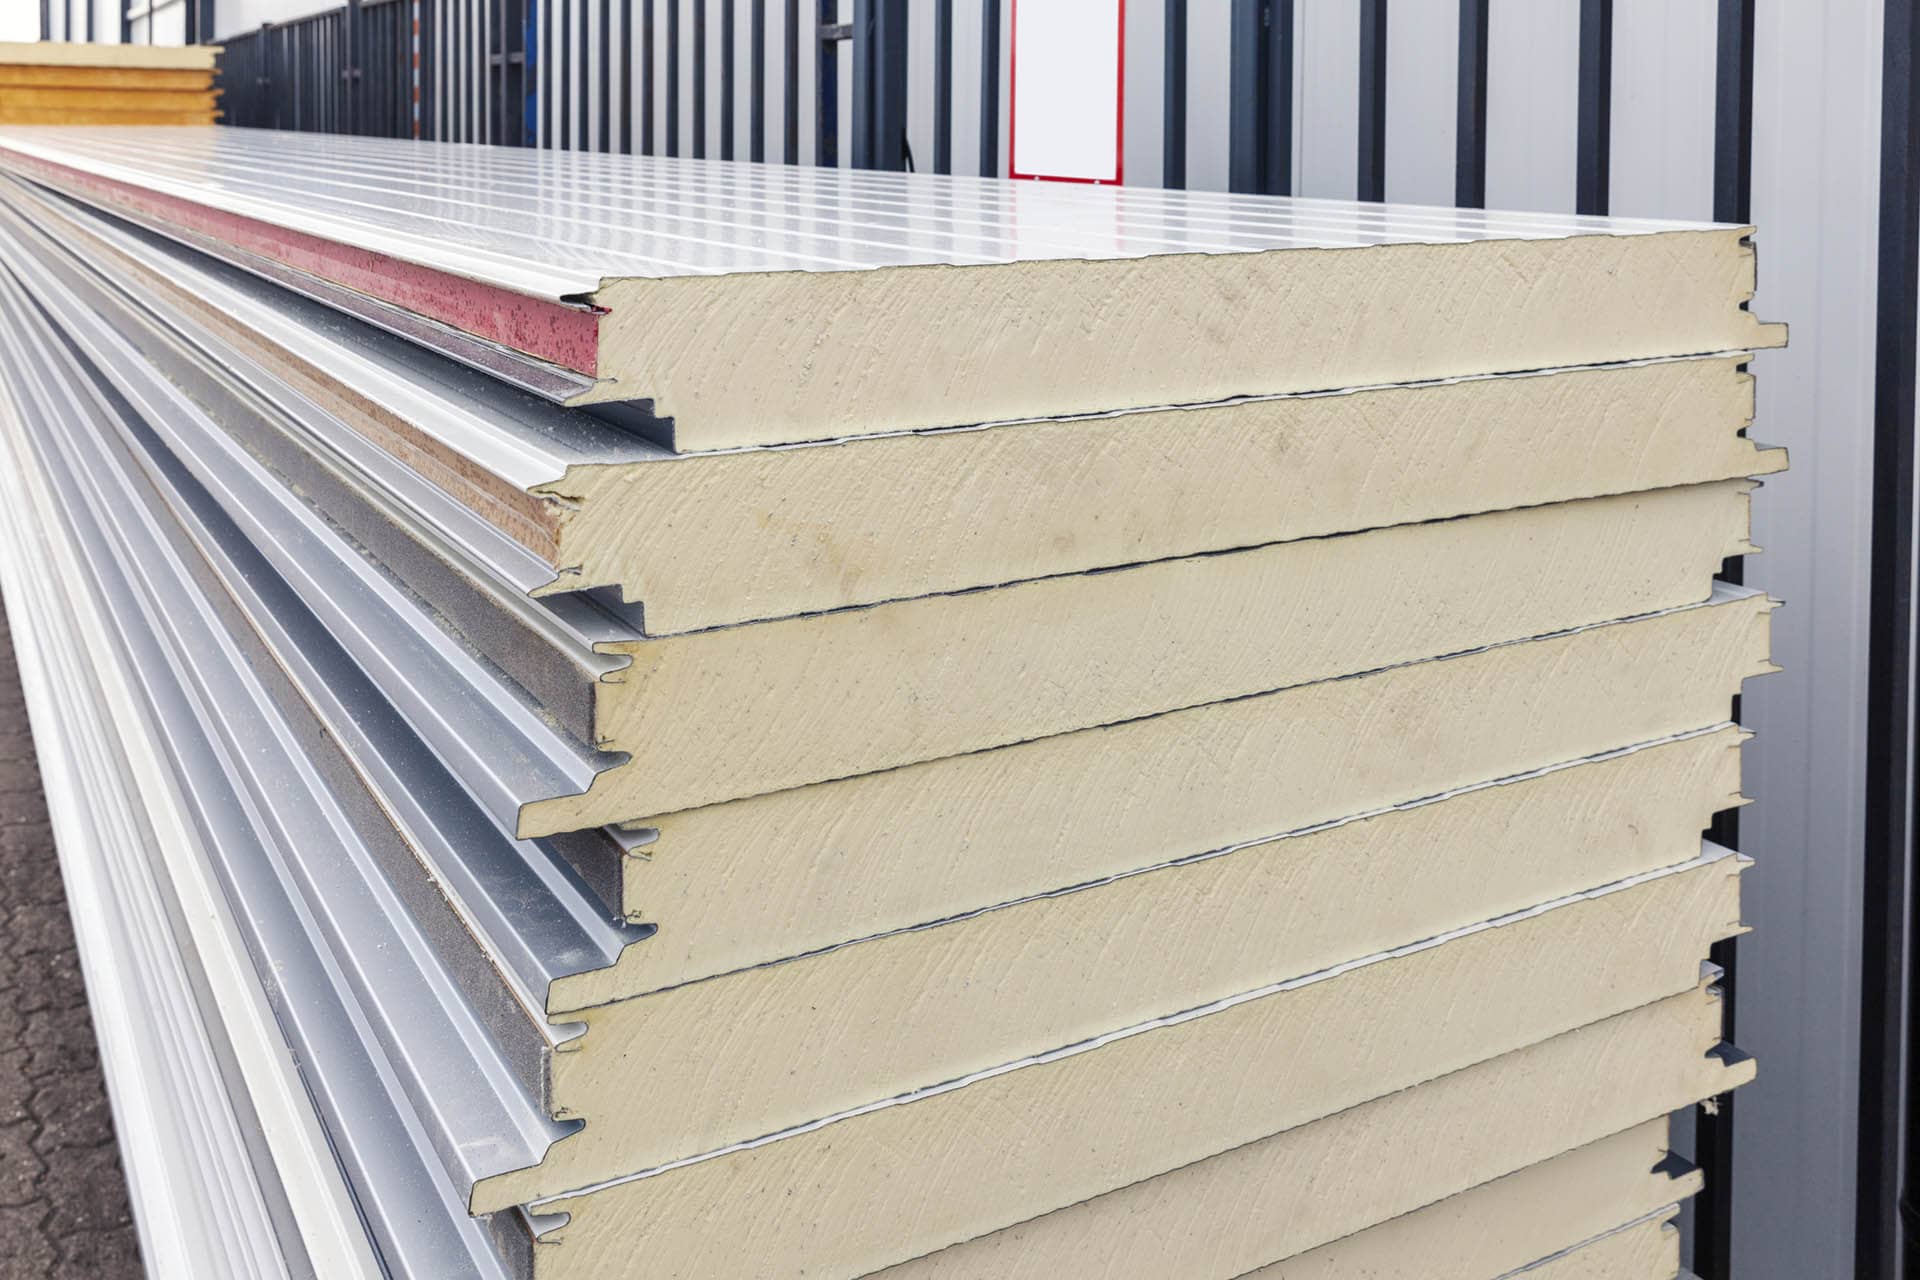 insulation-foam-board-building-materials-stacked-yard